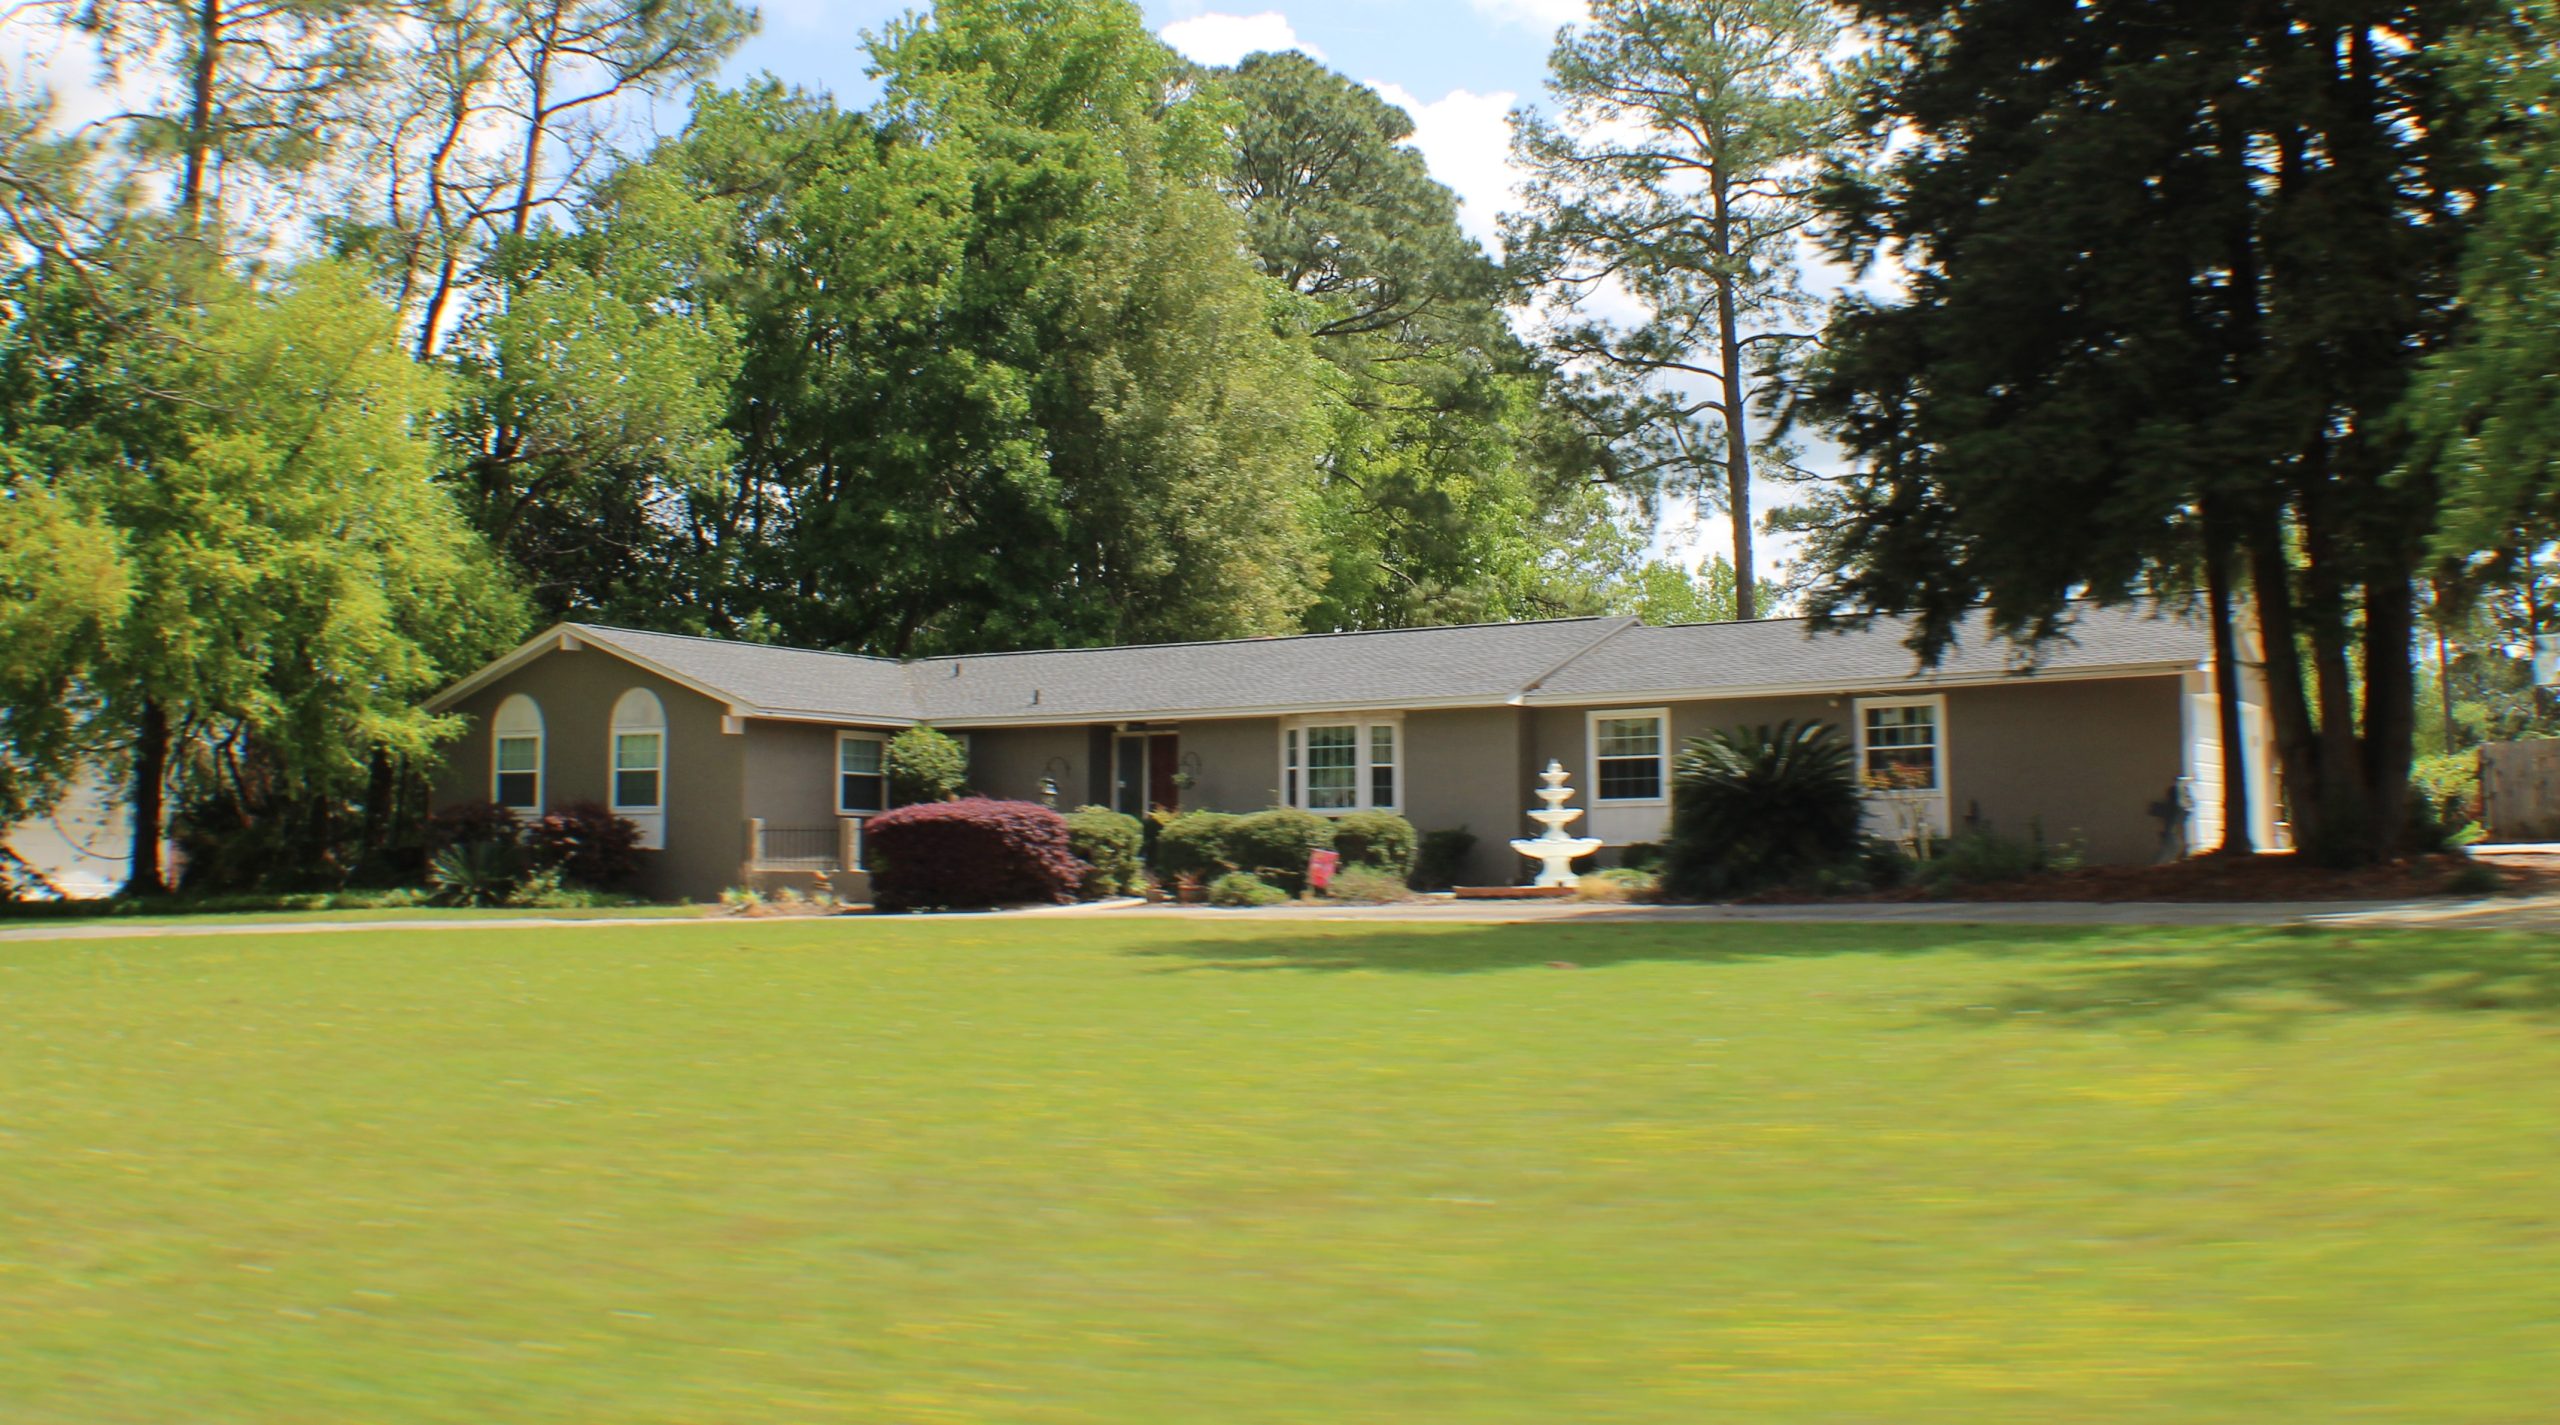 Brick ranch home with a large front yard and white fountain found in Killearn Tallahassee